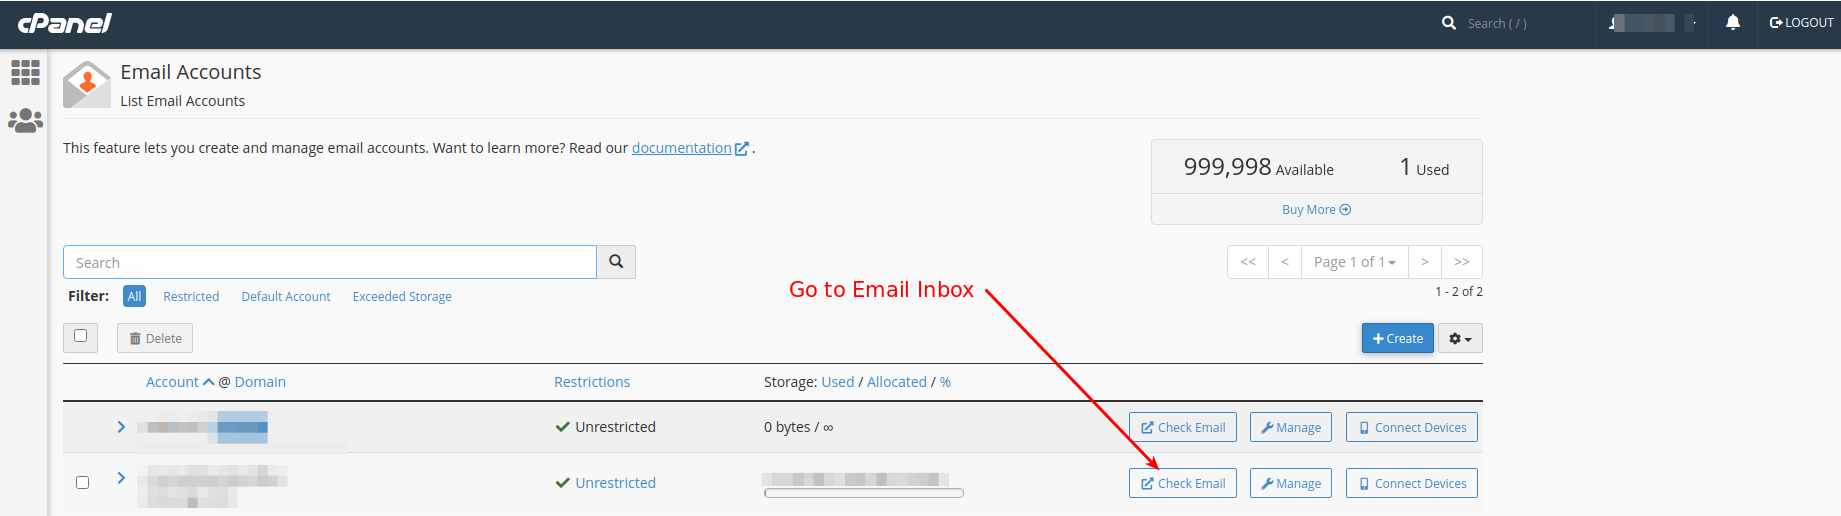 Enter a corporate email without having access data through the Email Account section in cPanel